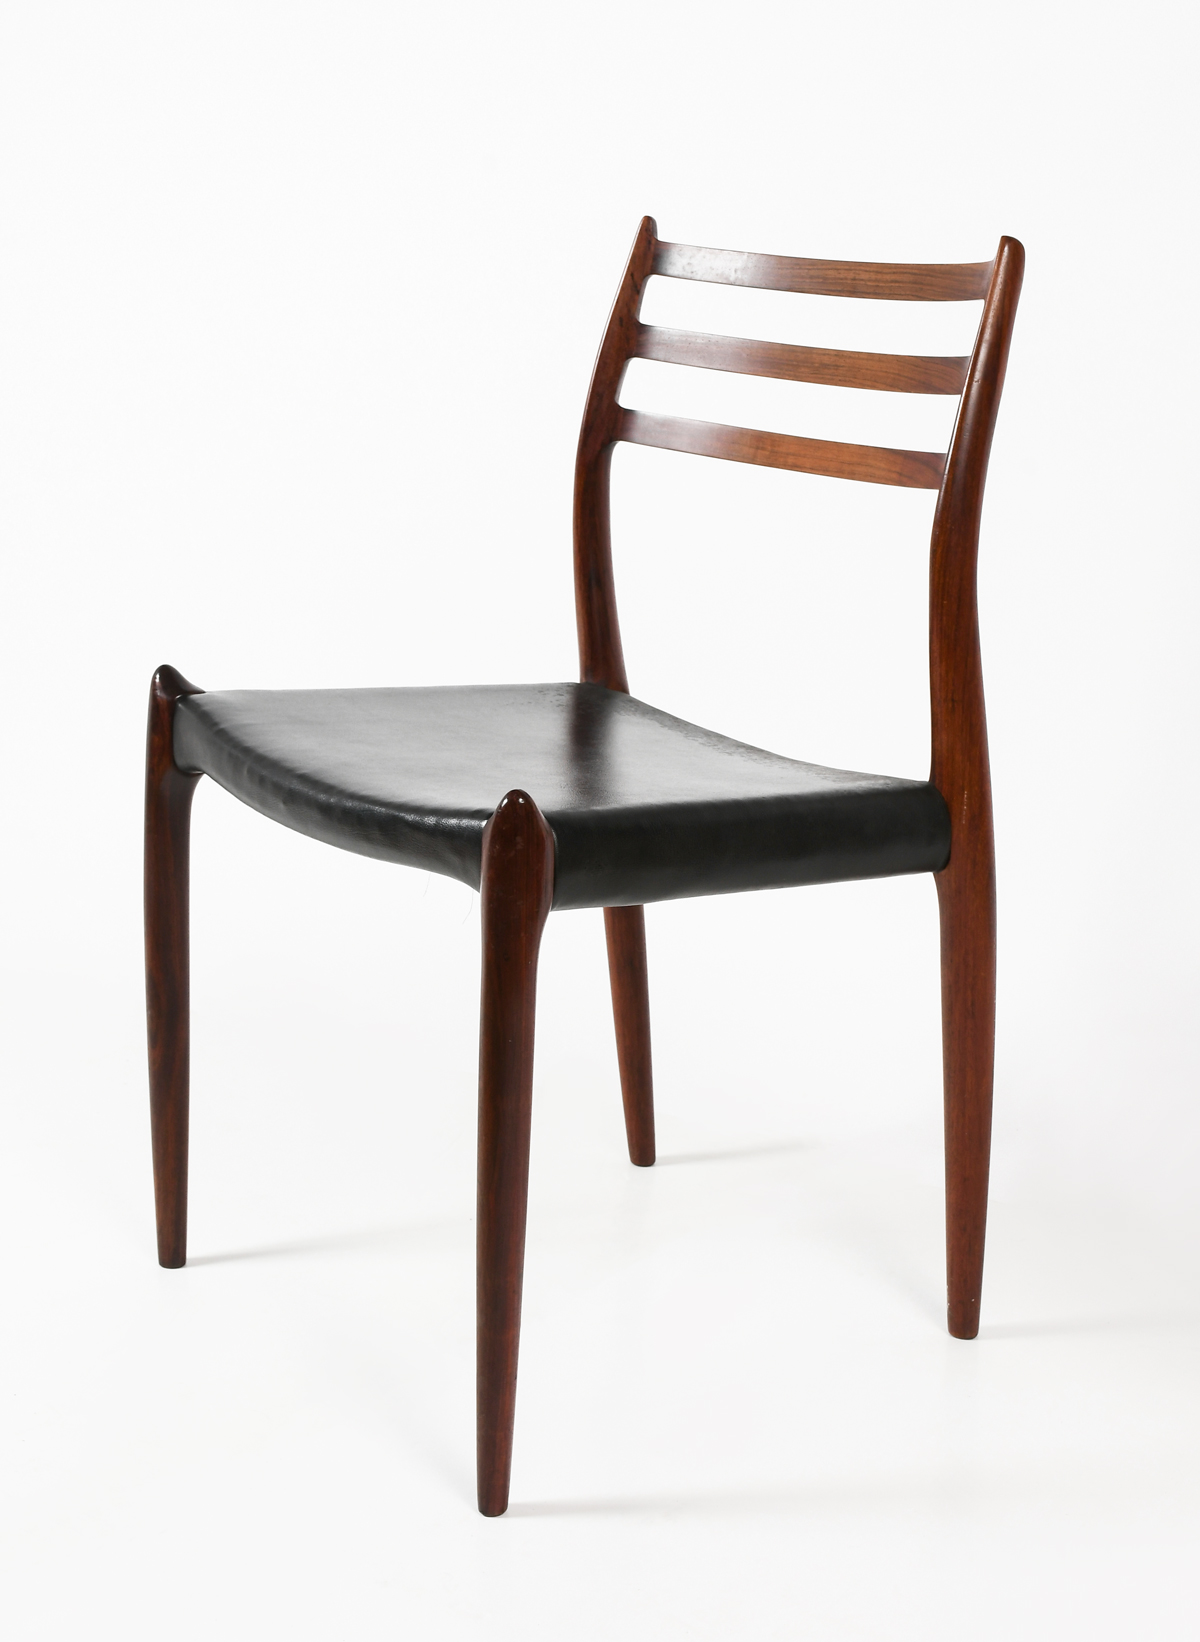 MODEL 78 ROSEWOOD DESK CHAIR: Knoll